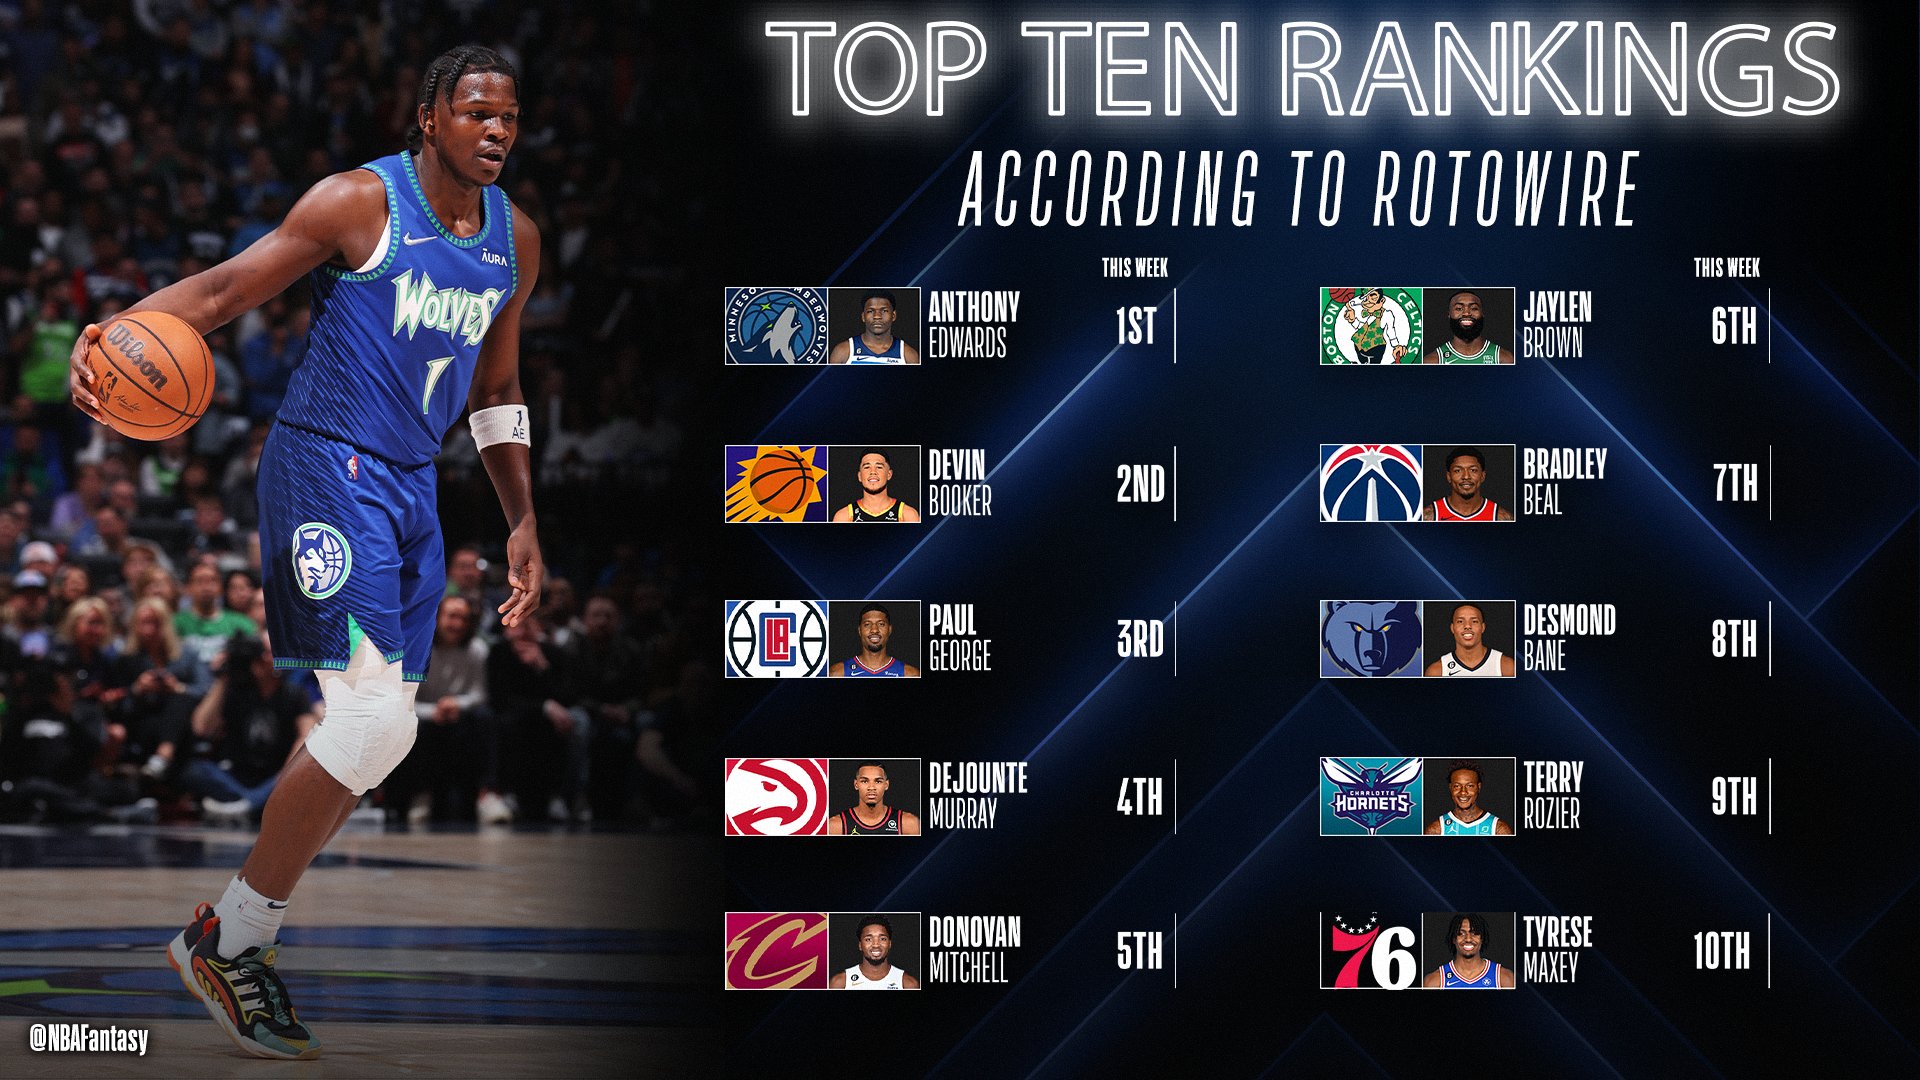 NBA Fantasy on Twitter: "1⃣ Week Away From Fantasy Basketball ‼️ Join @YahooFantasy and get prepared for your draft with Top 🔟 Shooting Guards 🙌 Check out the final @RotoWire Top